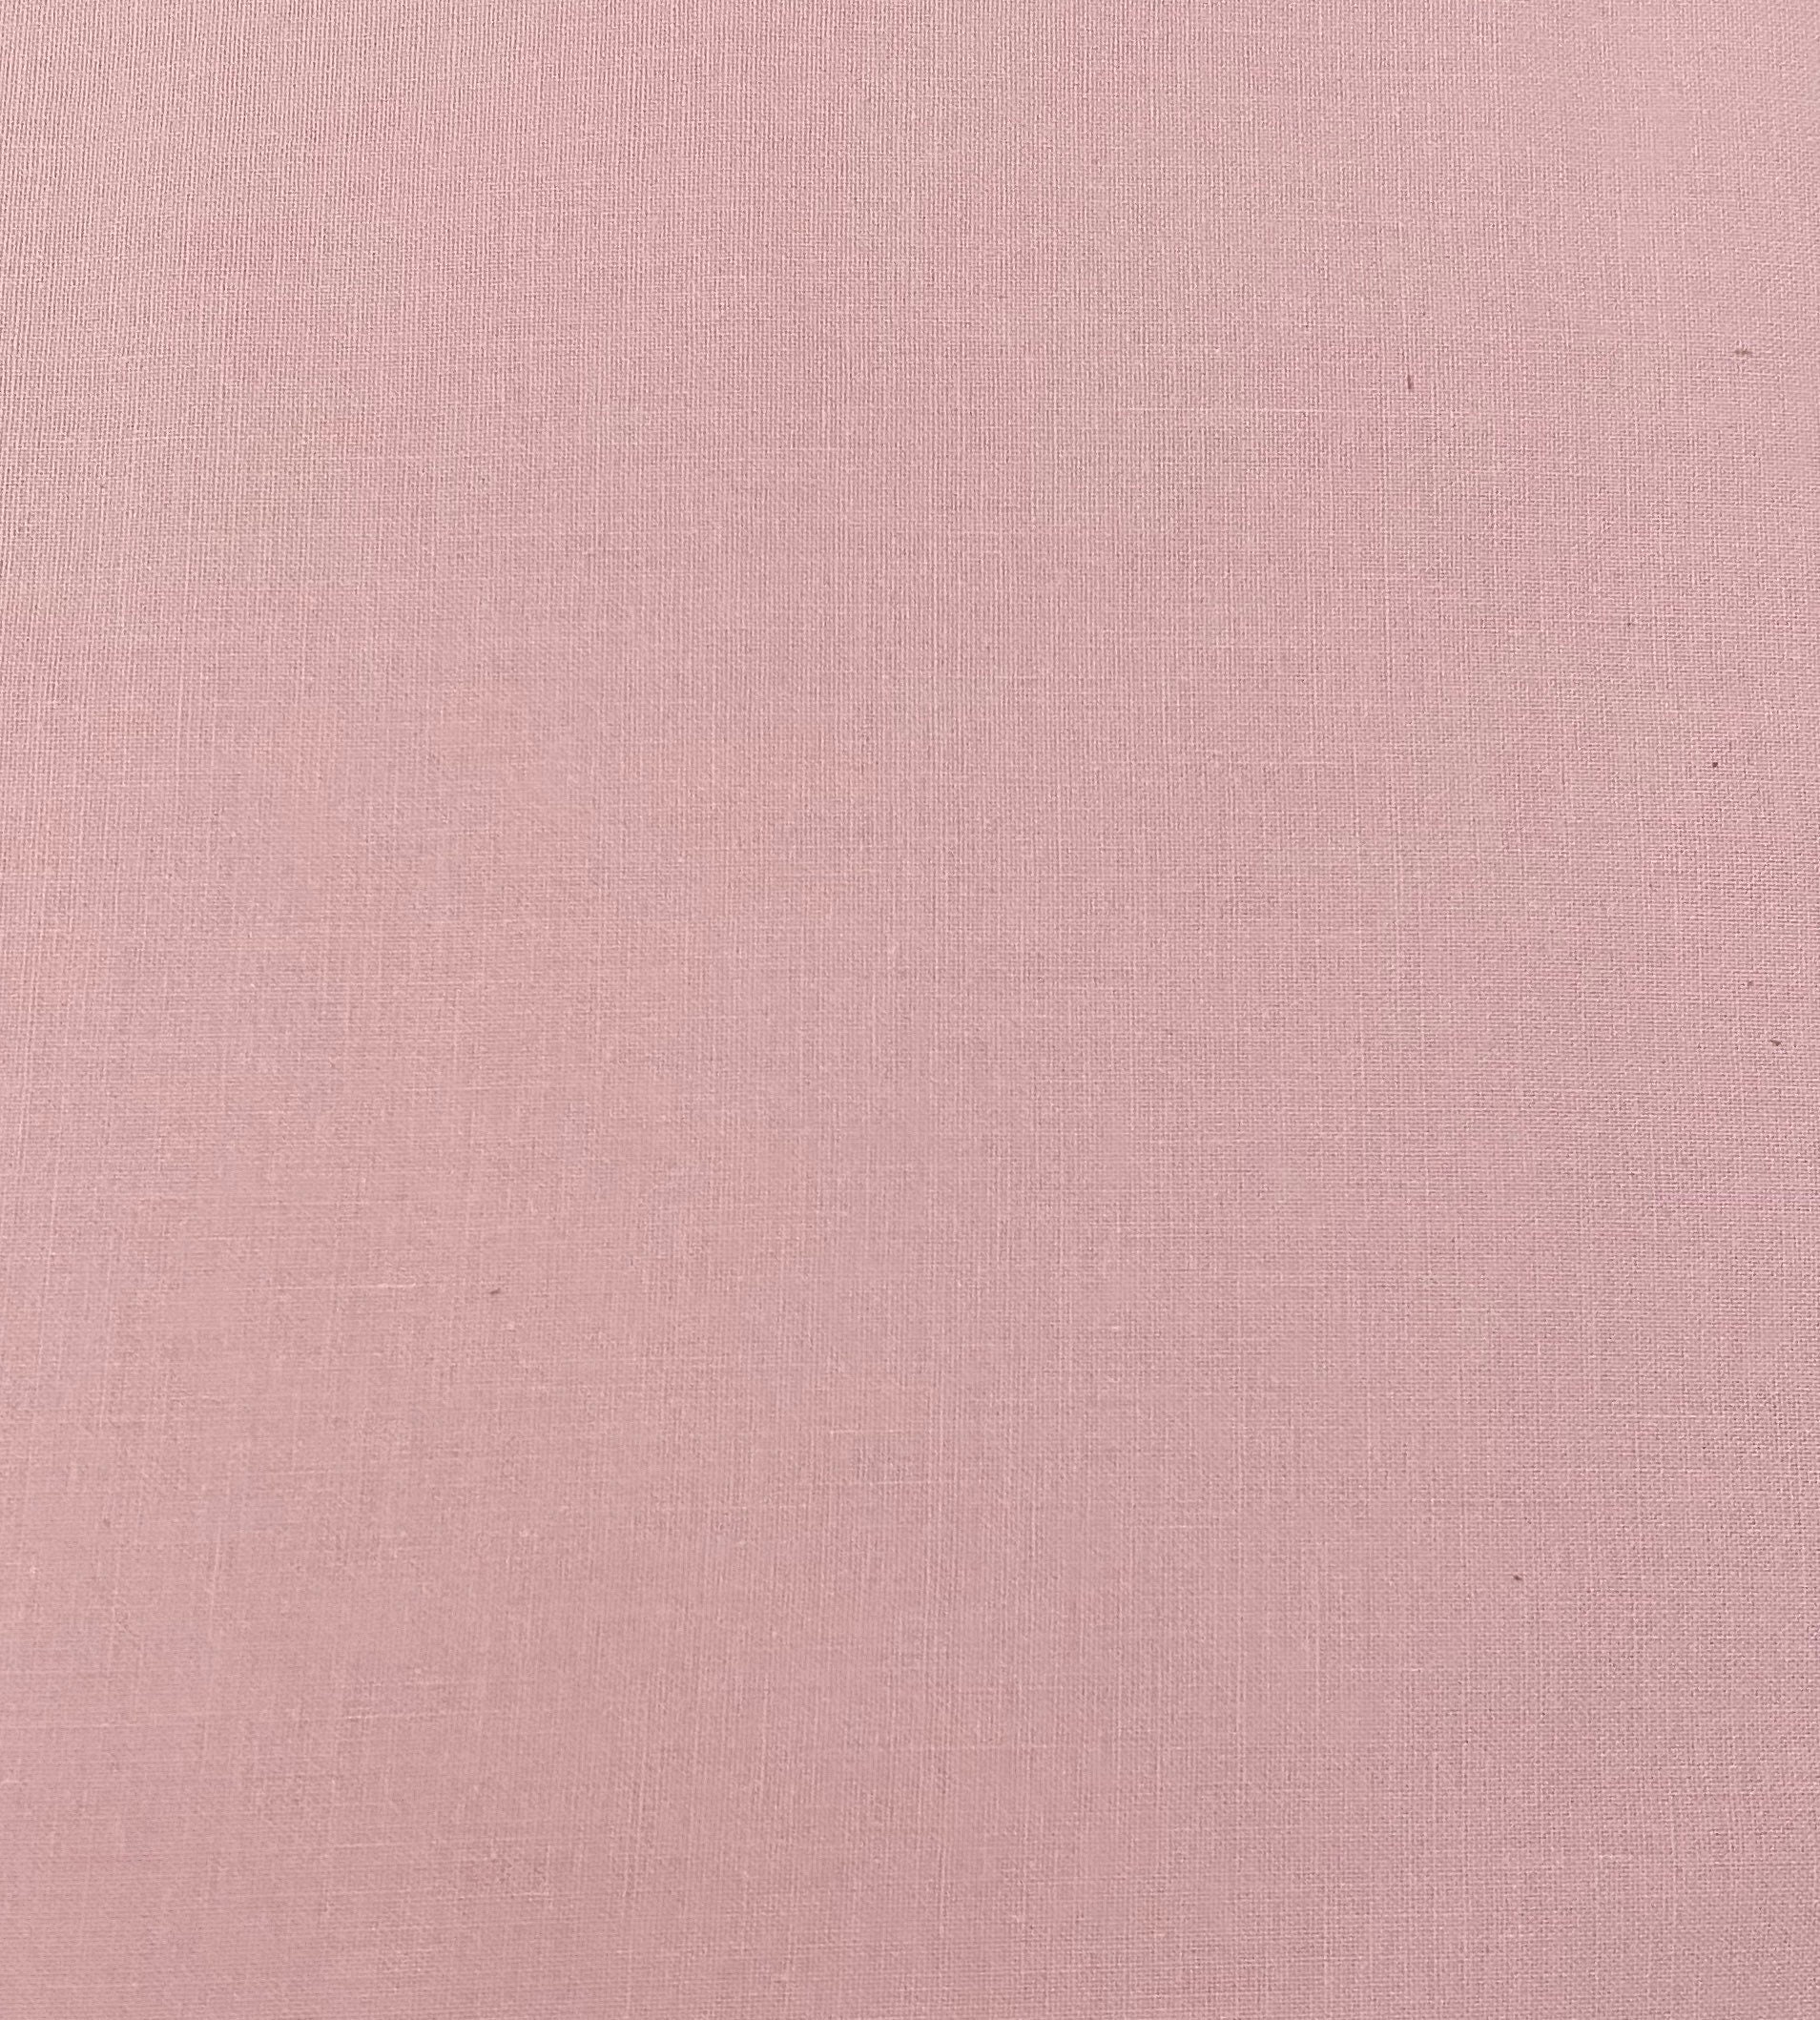 Light Pink Fabric by the Yard, Light Pink Fabric by the Yard